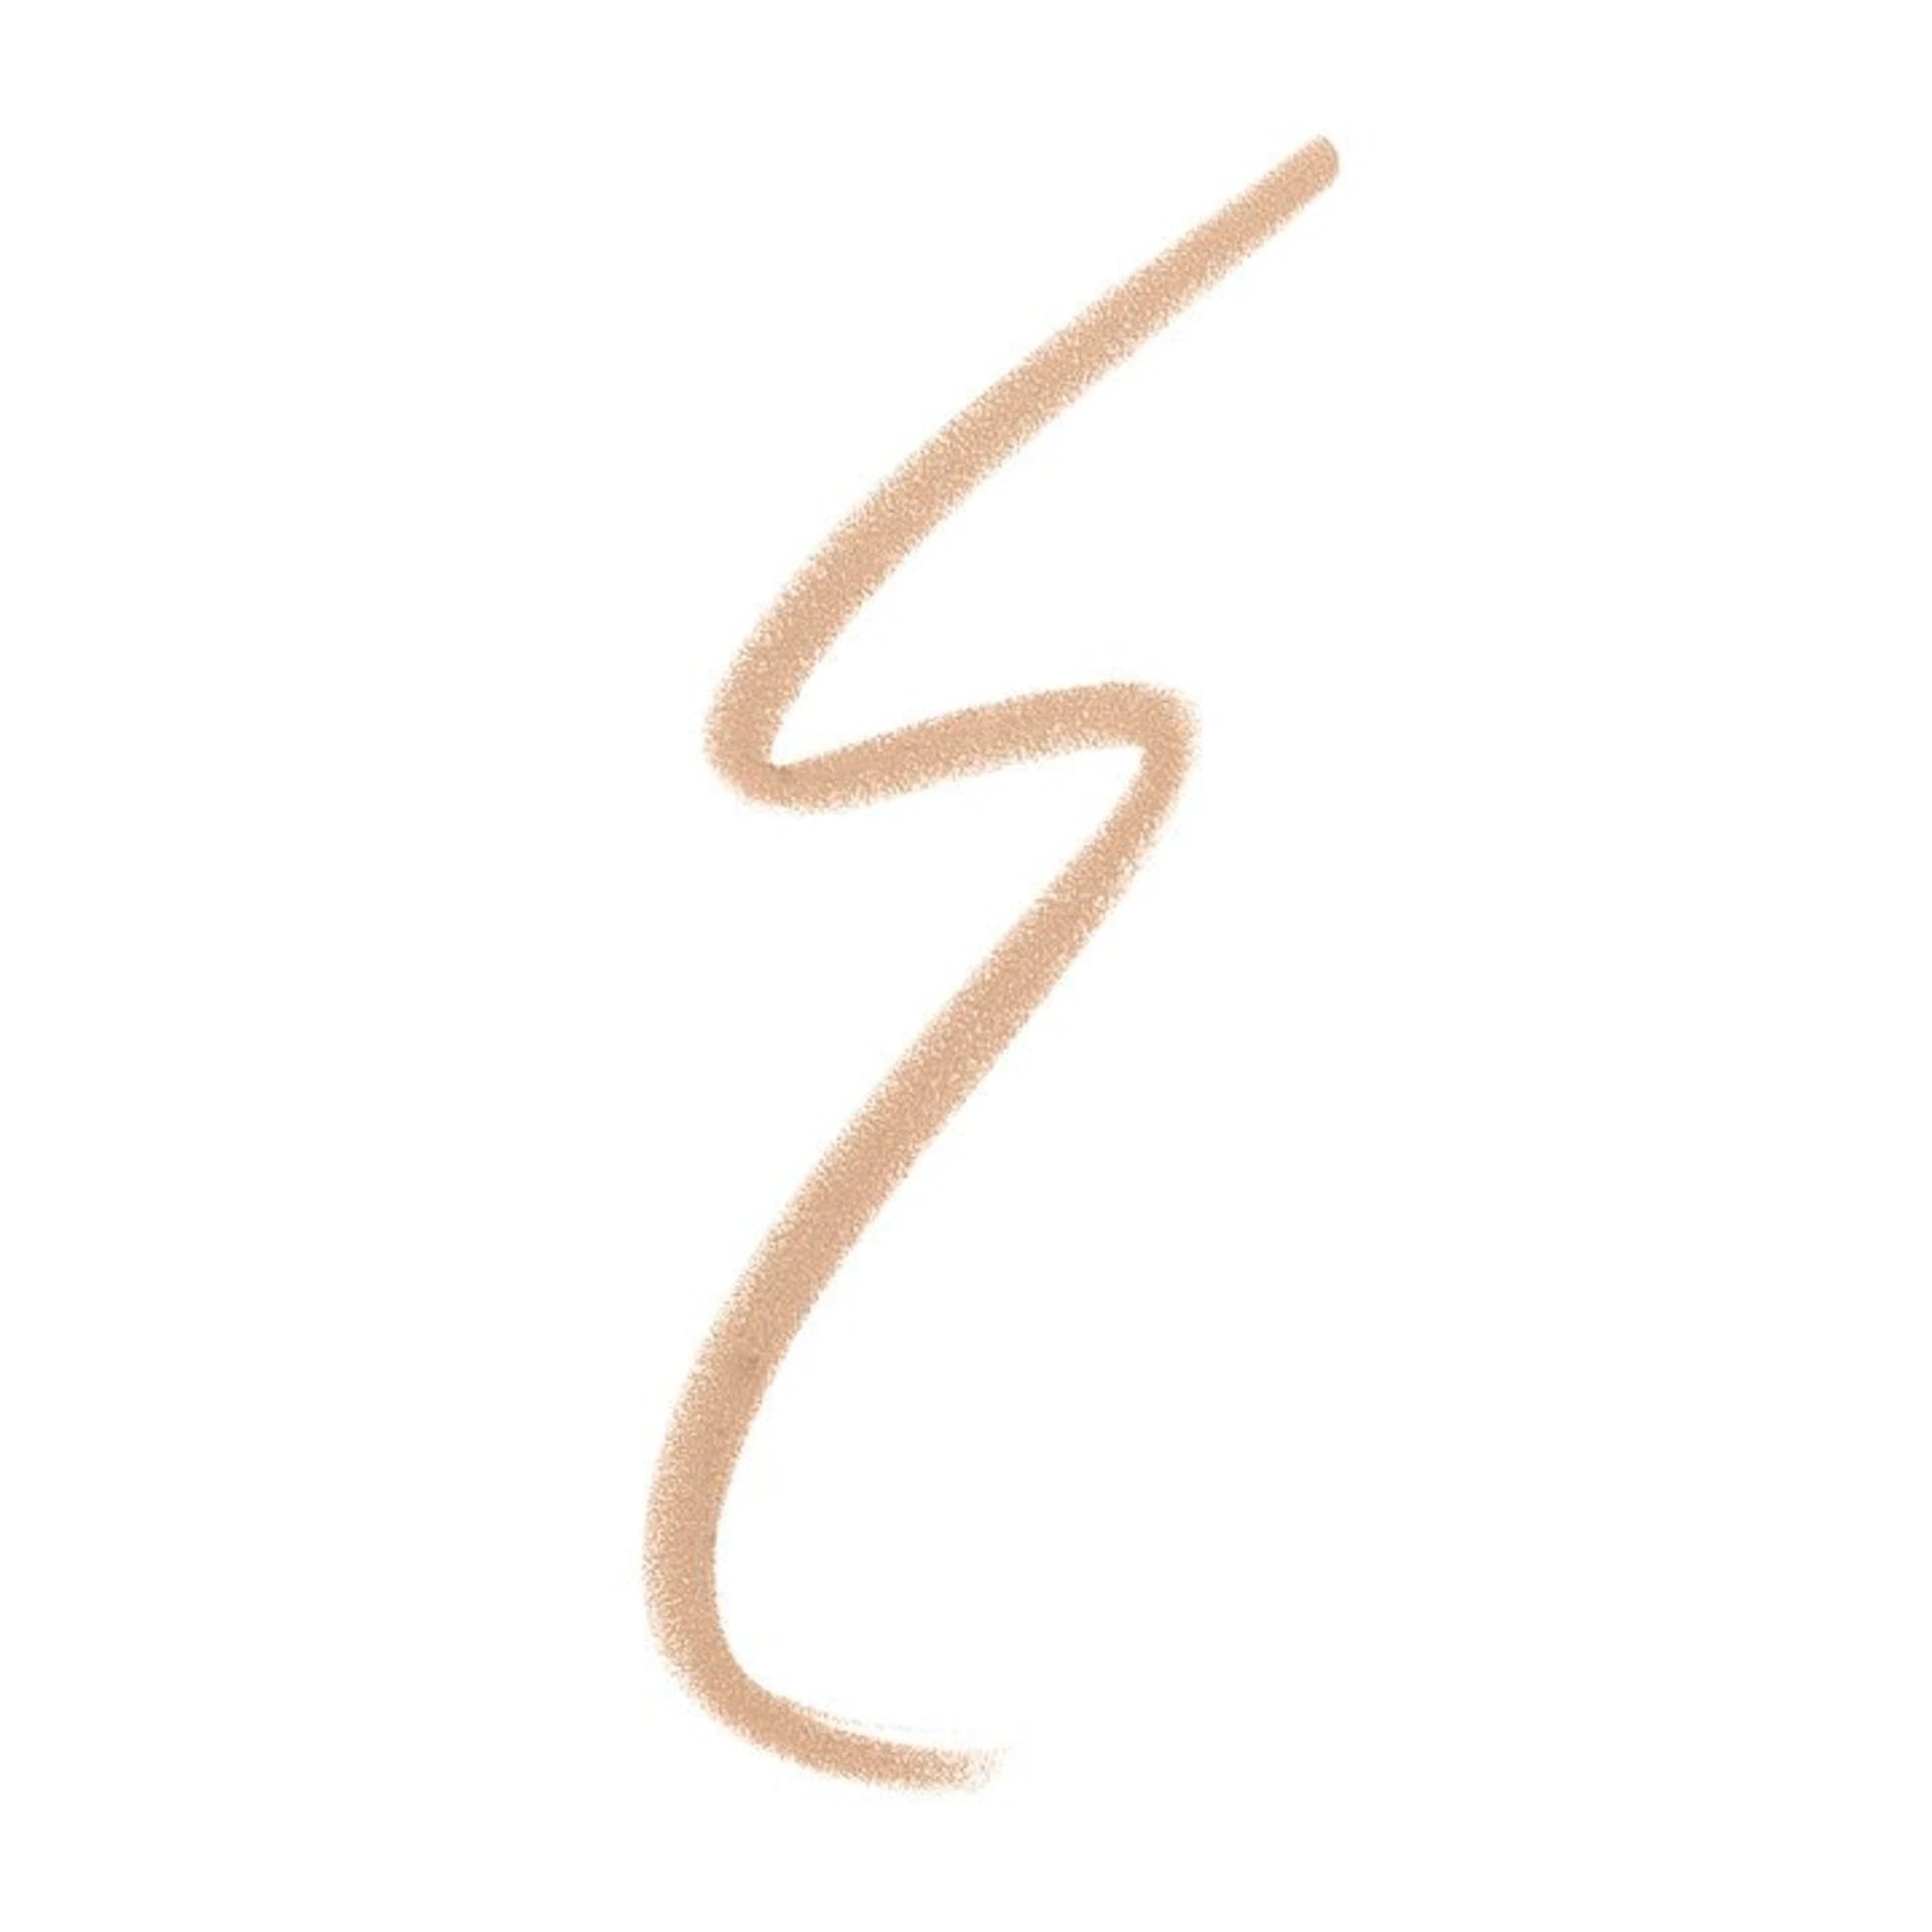 Jane Iredale's Retractable Brow Pencil - shade Blonde